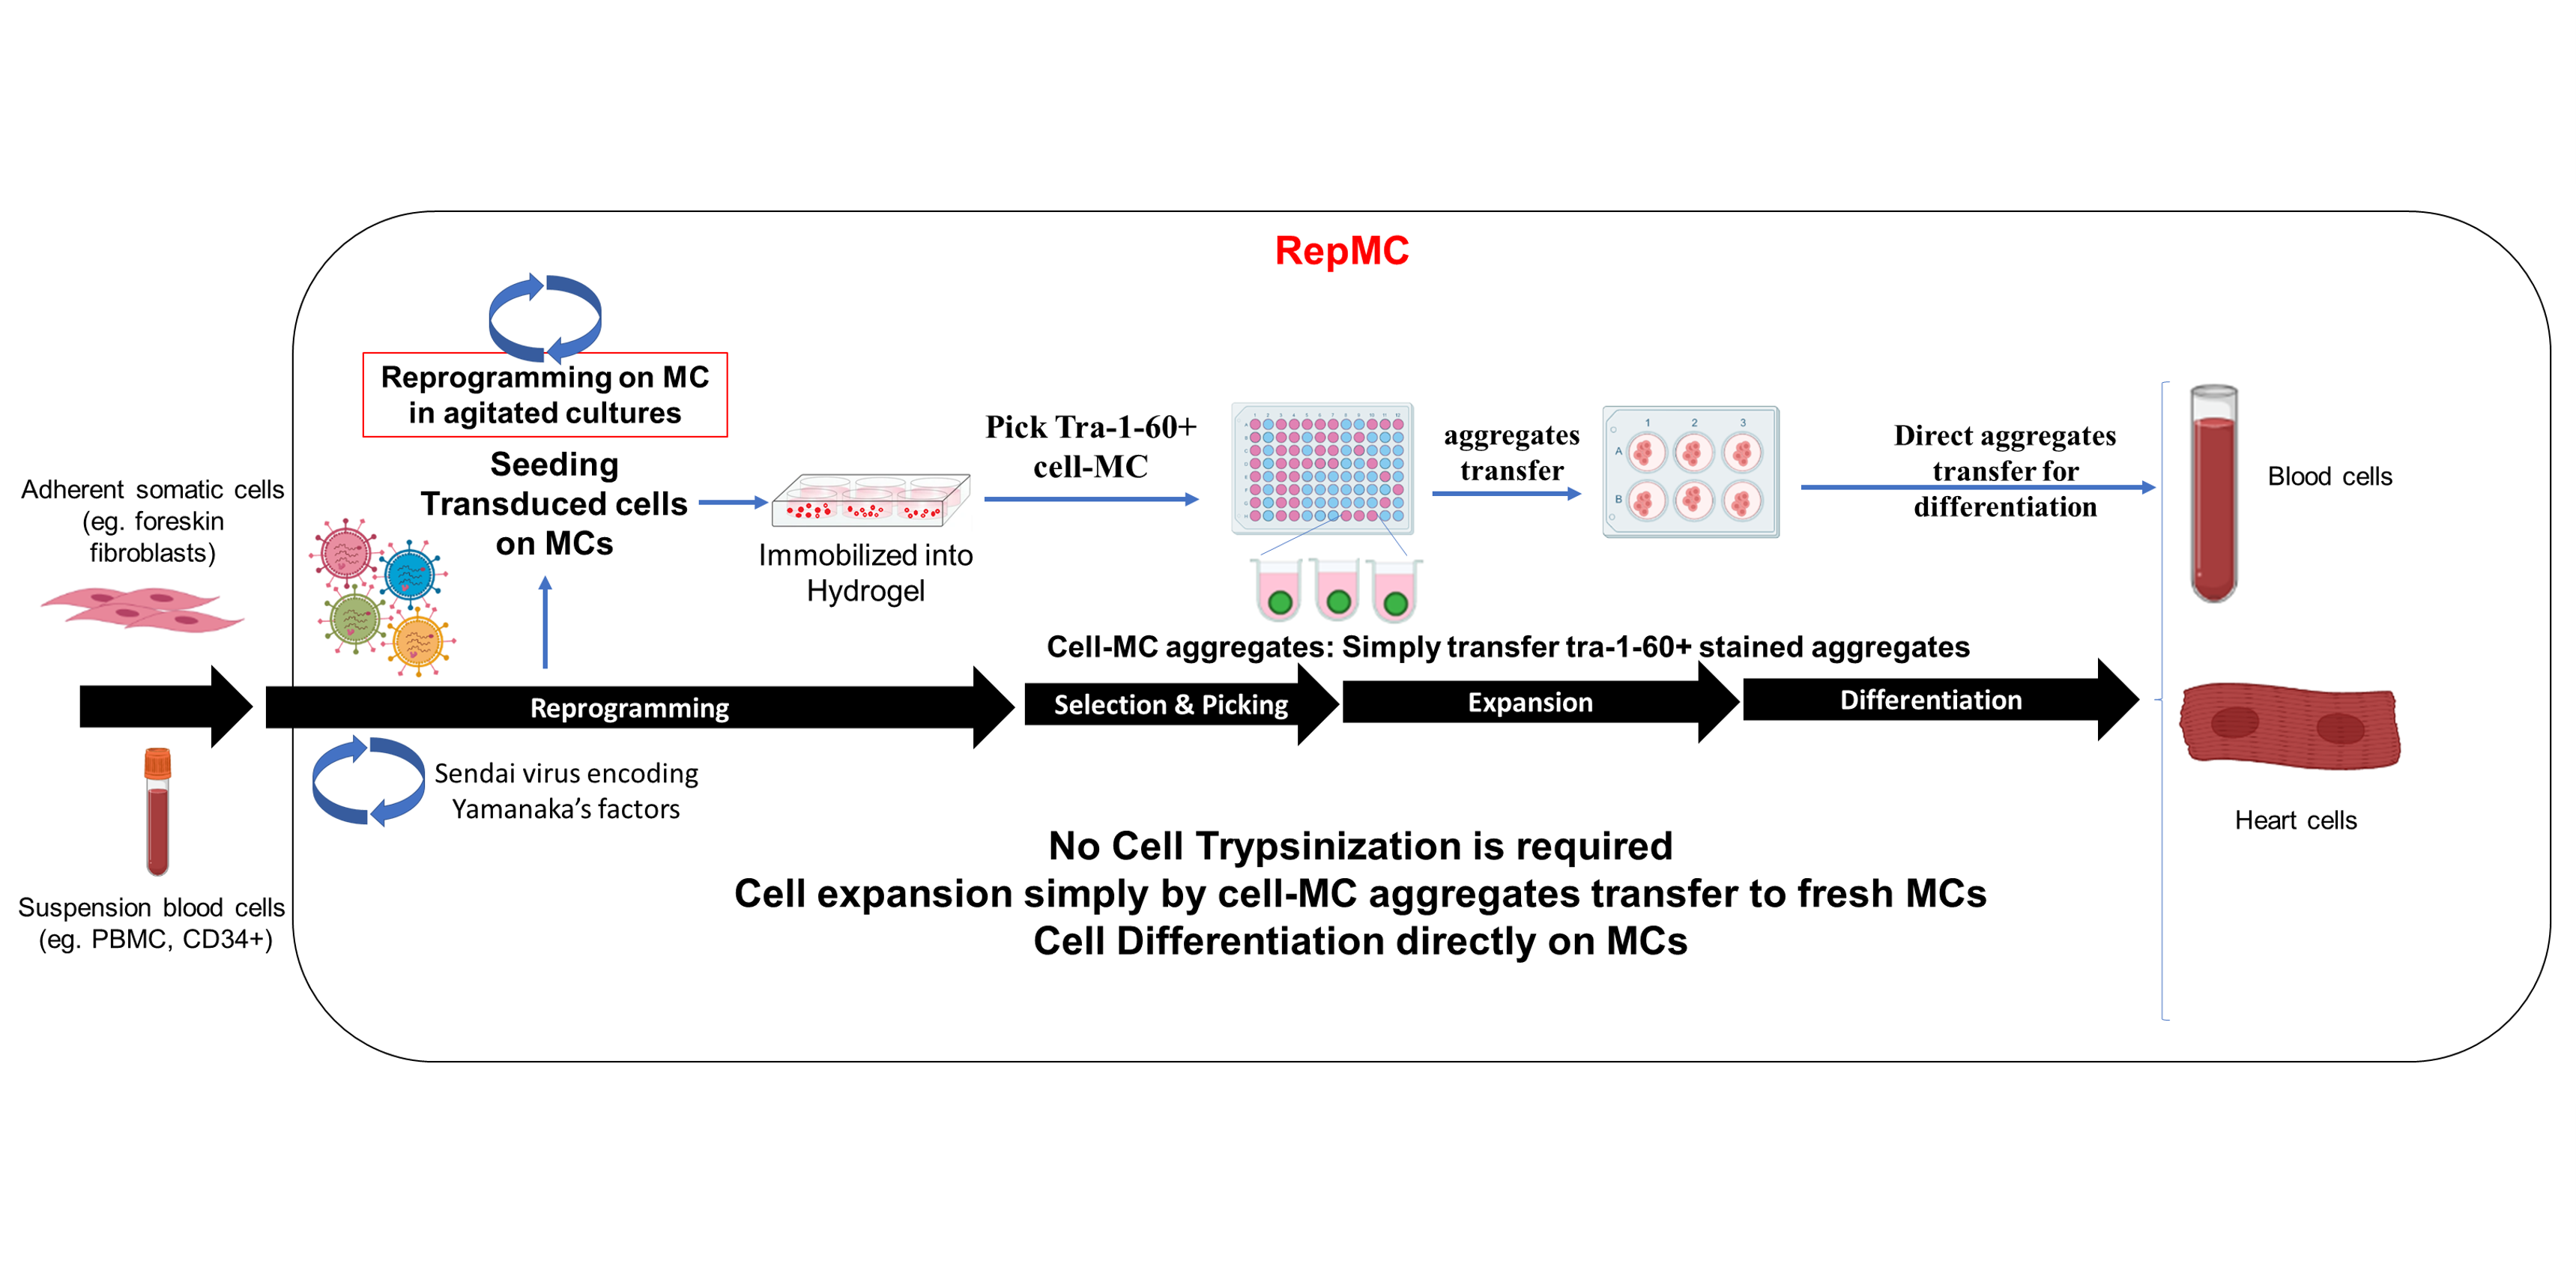 All-In-One Platform for Reprogramming on Microcarriers (RepMC)